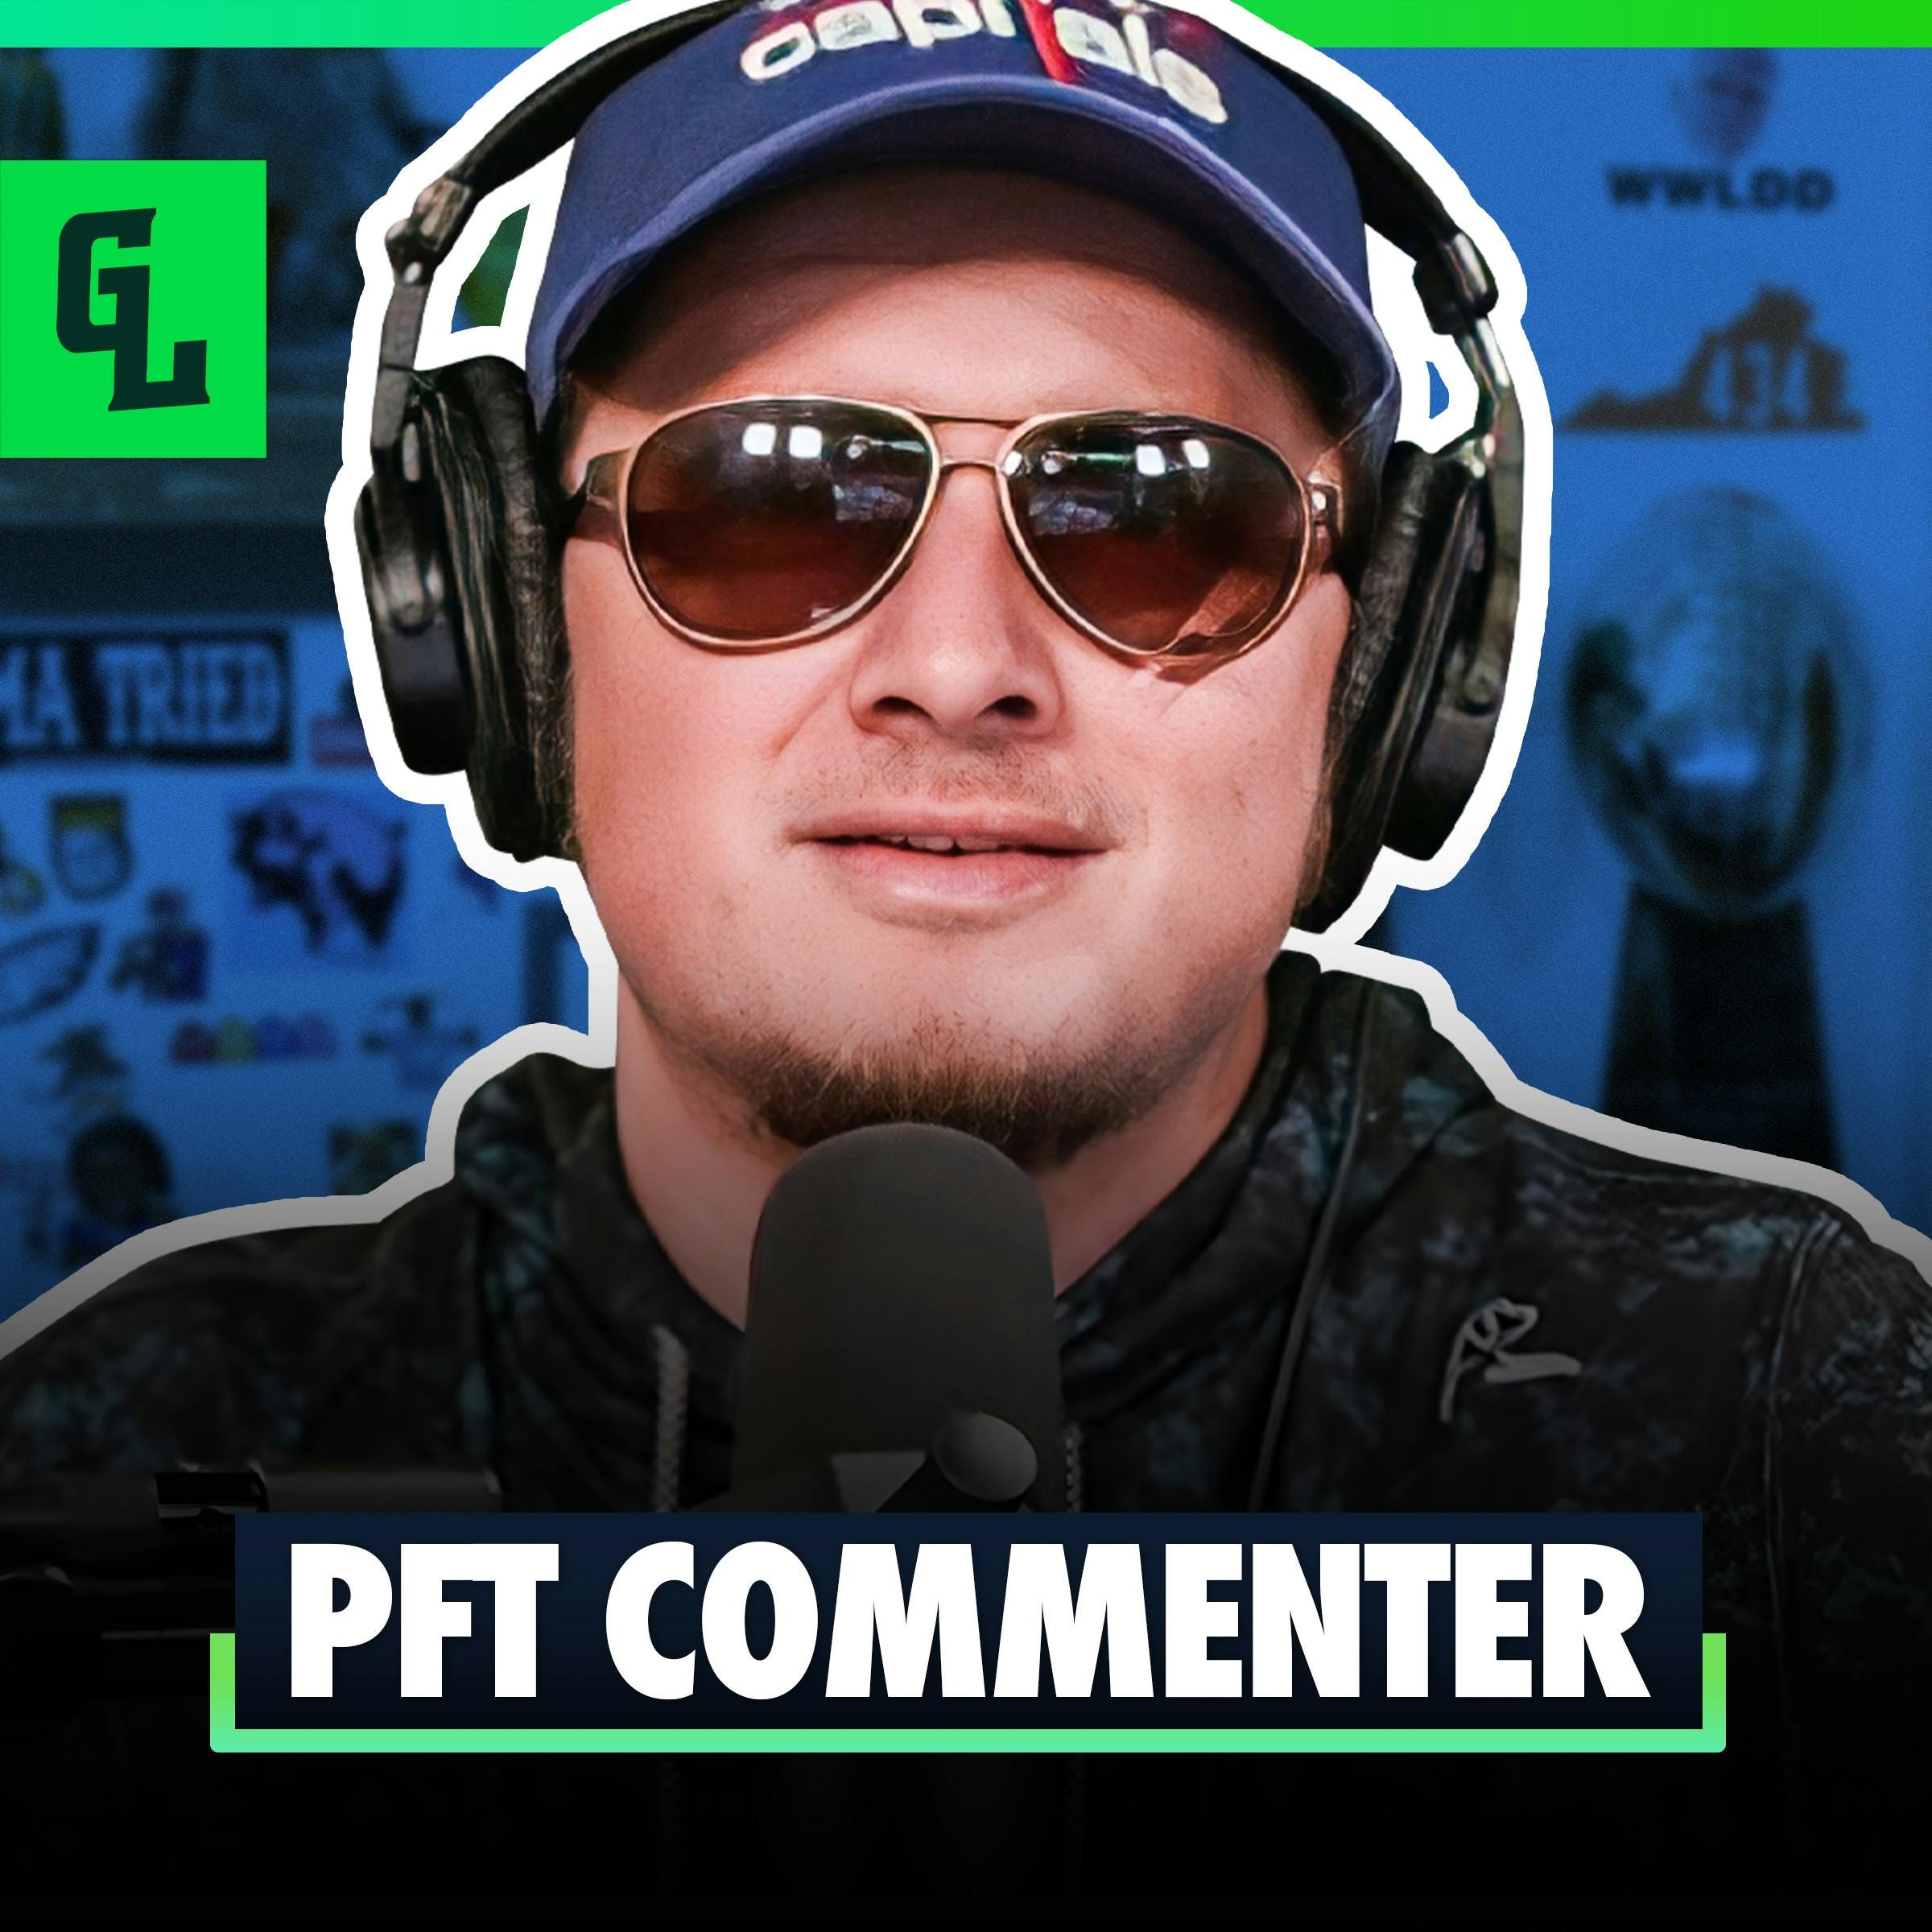 PFT Commenter! Dan Quinn in Washington, Stories from the Super Bowl in Vegas & Worst Ways to Die